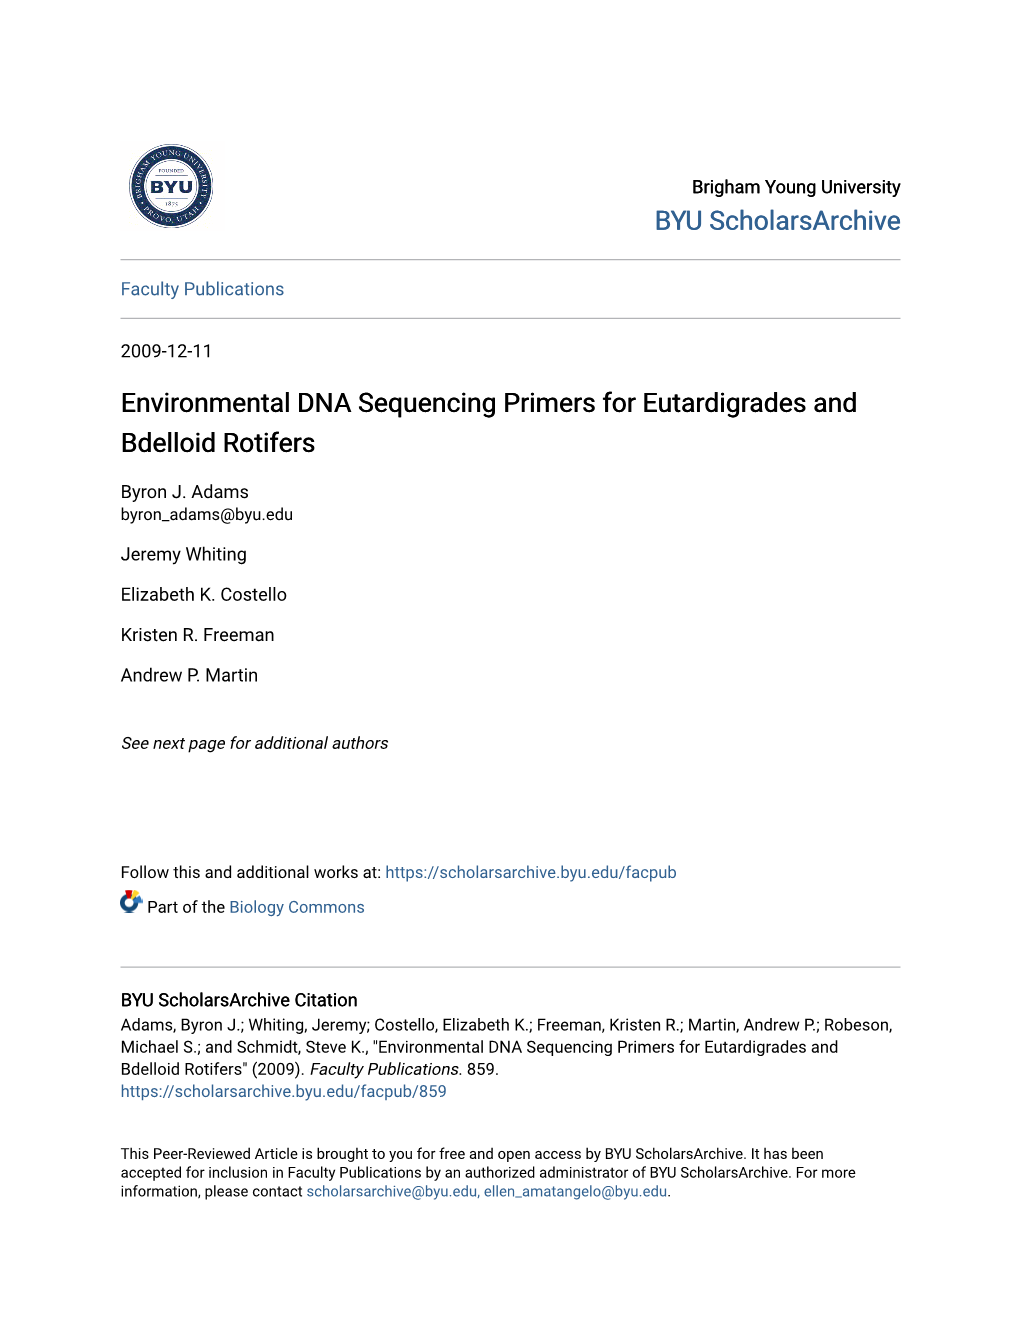 Environmental DNA Sequencing Primers for Eutardigrades and Bdelloid Rotifers